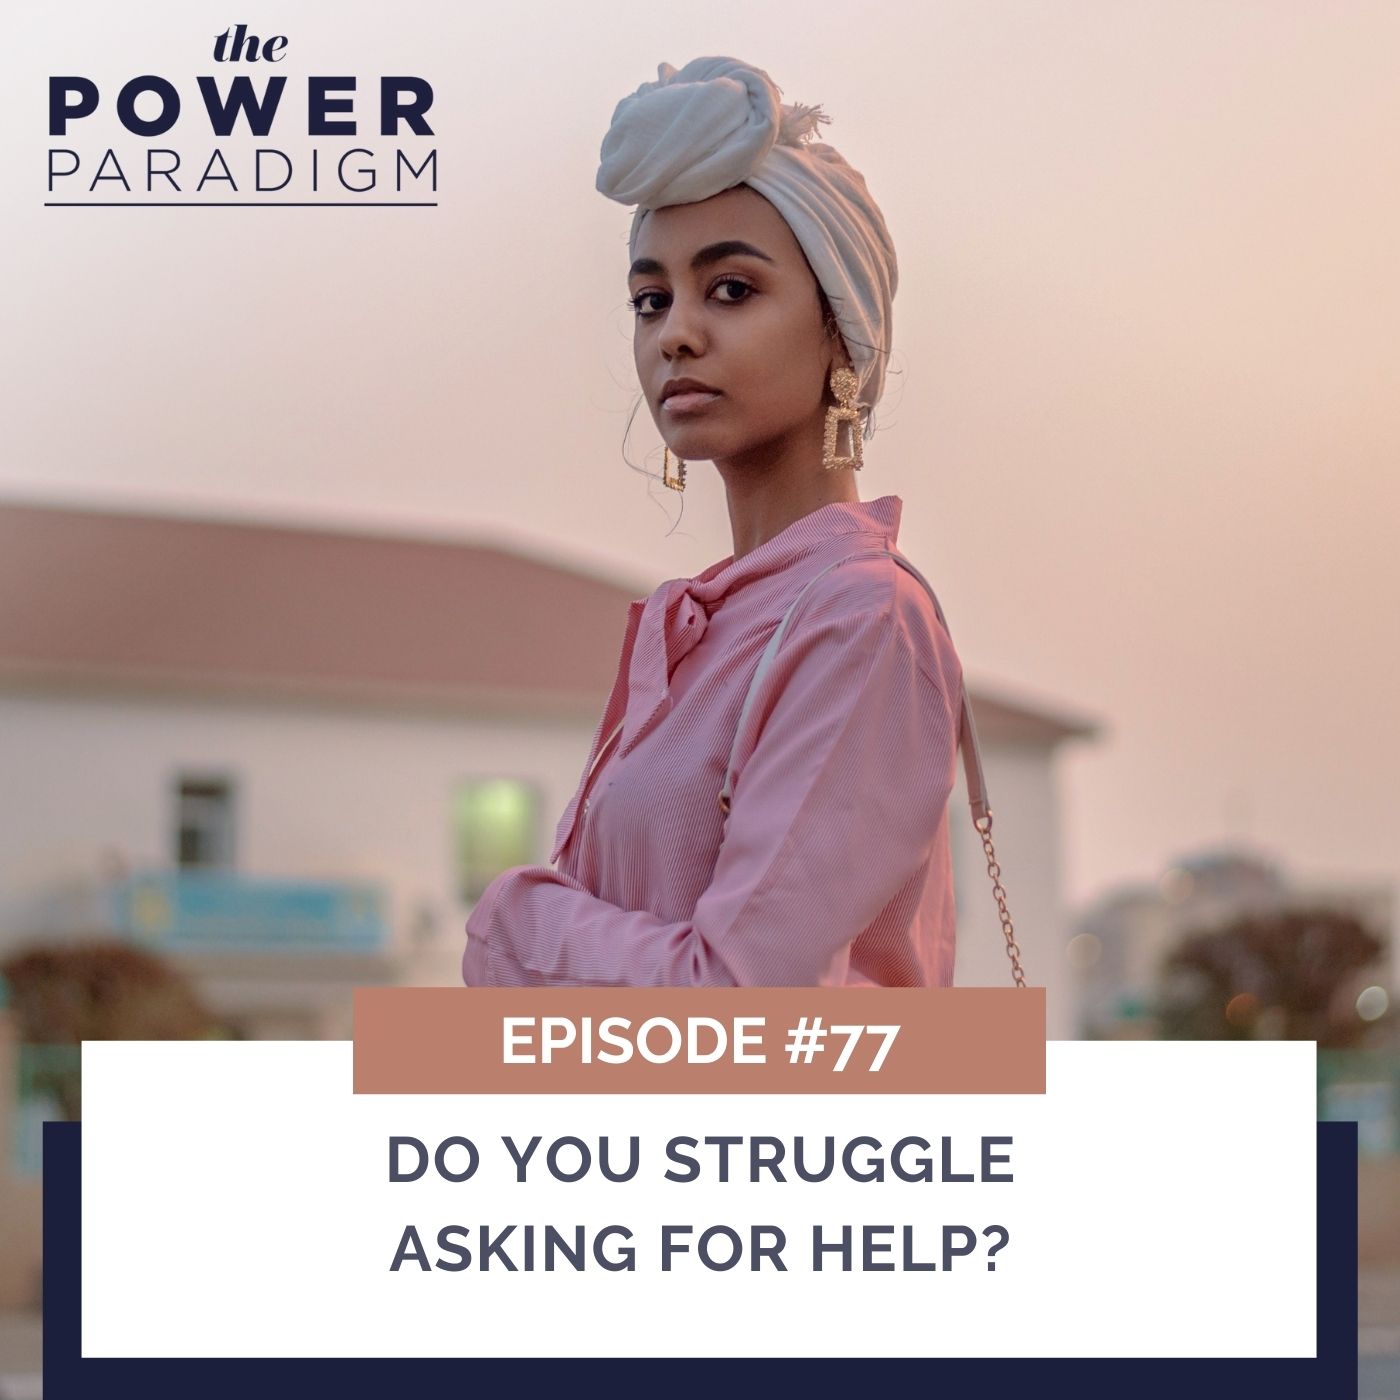 The Power Paradigm | Do You Struggle Asking for Help?